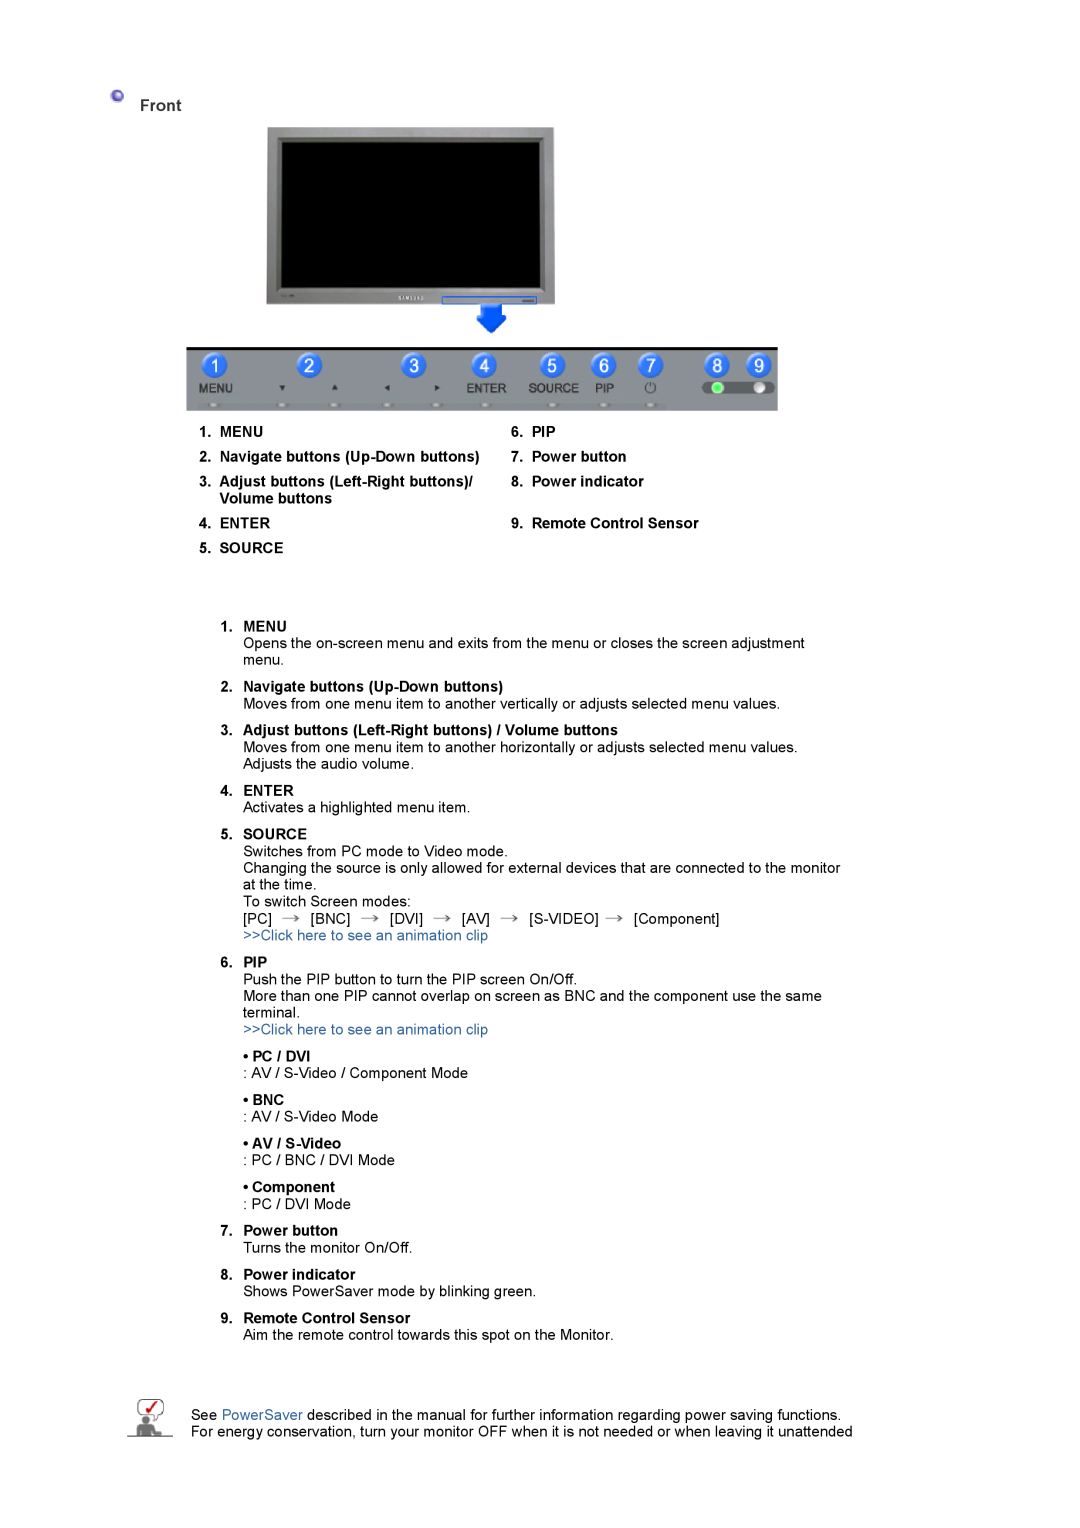 Samsung 320P manual Front, Click here to see an animation clip 